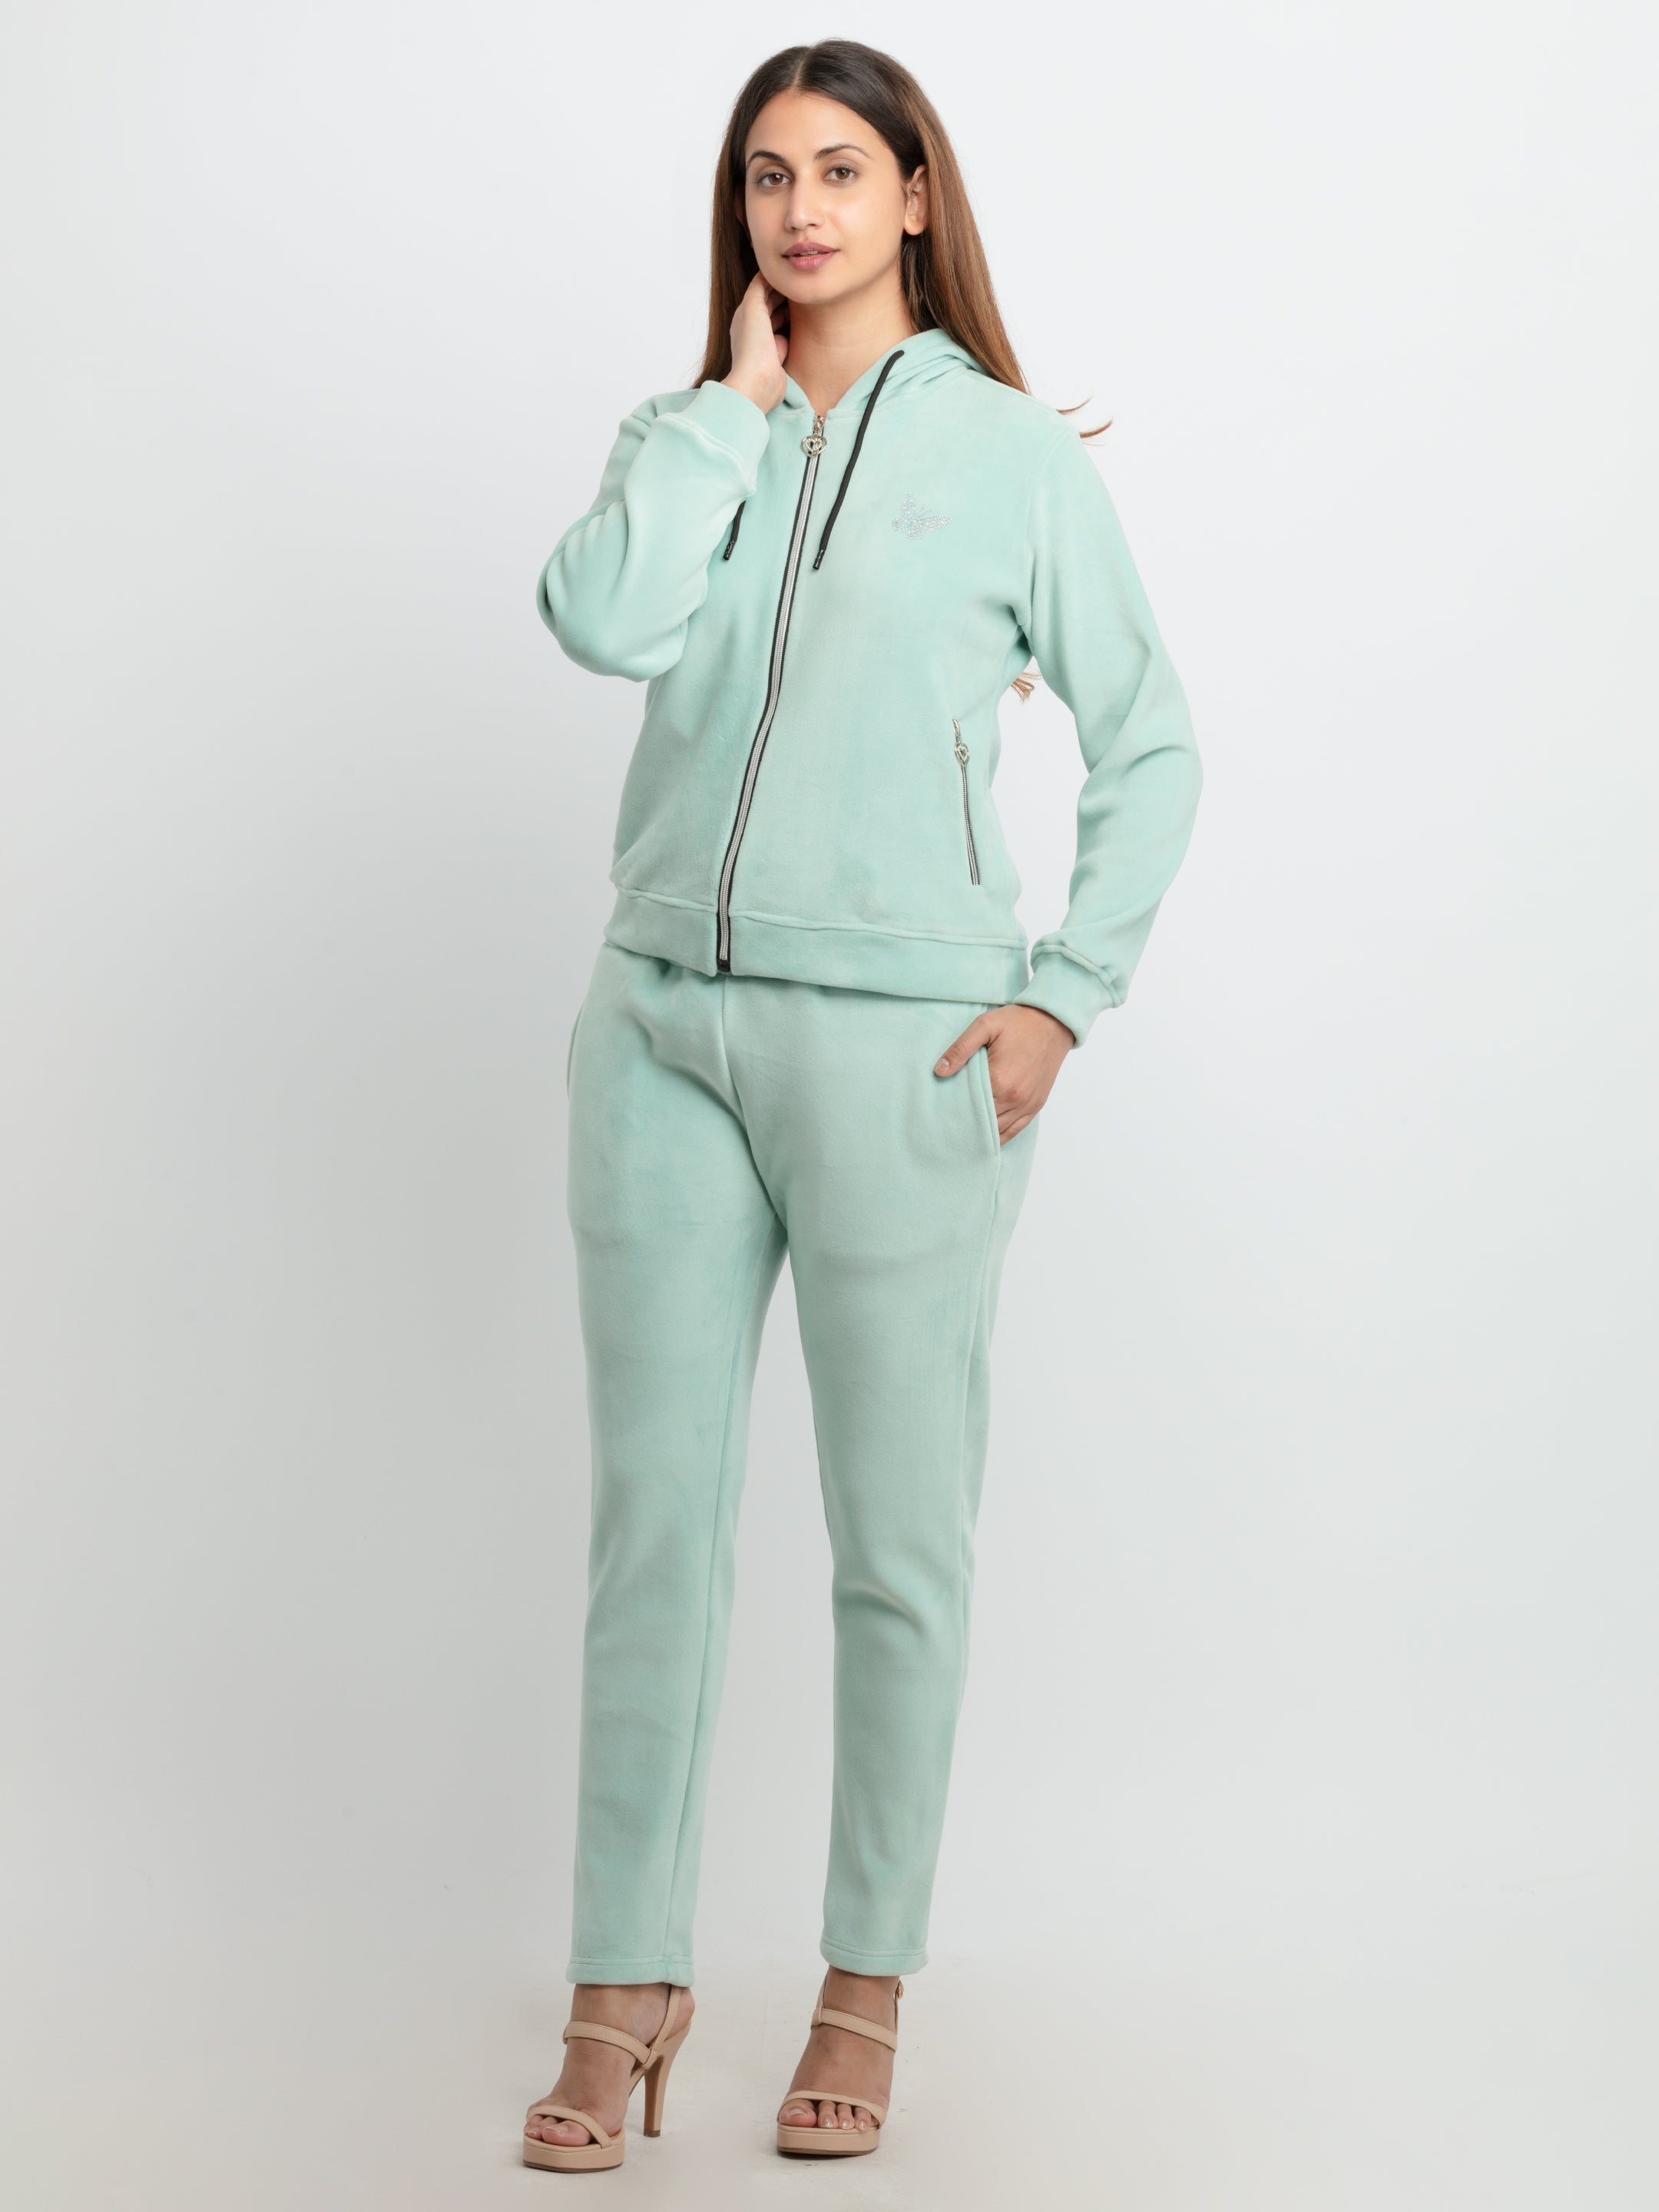 Womens Solid Zipper Tracksuit